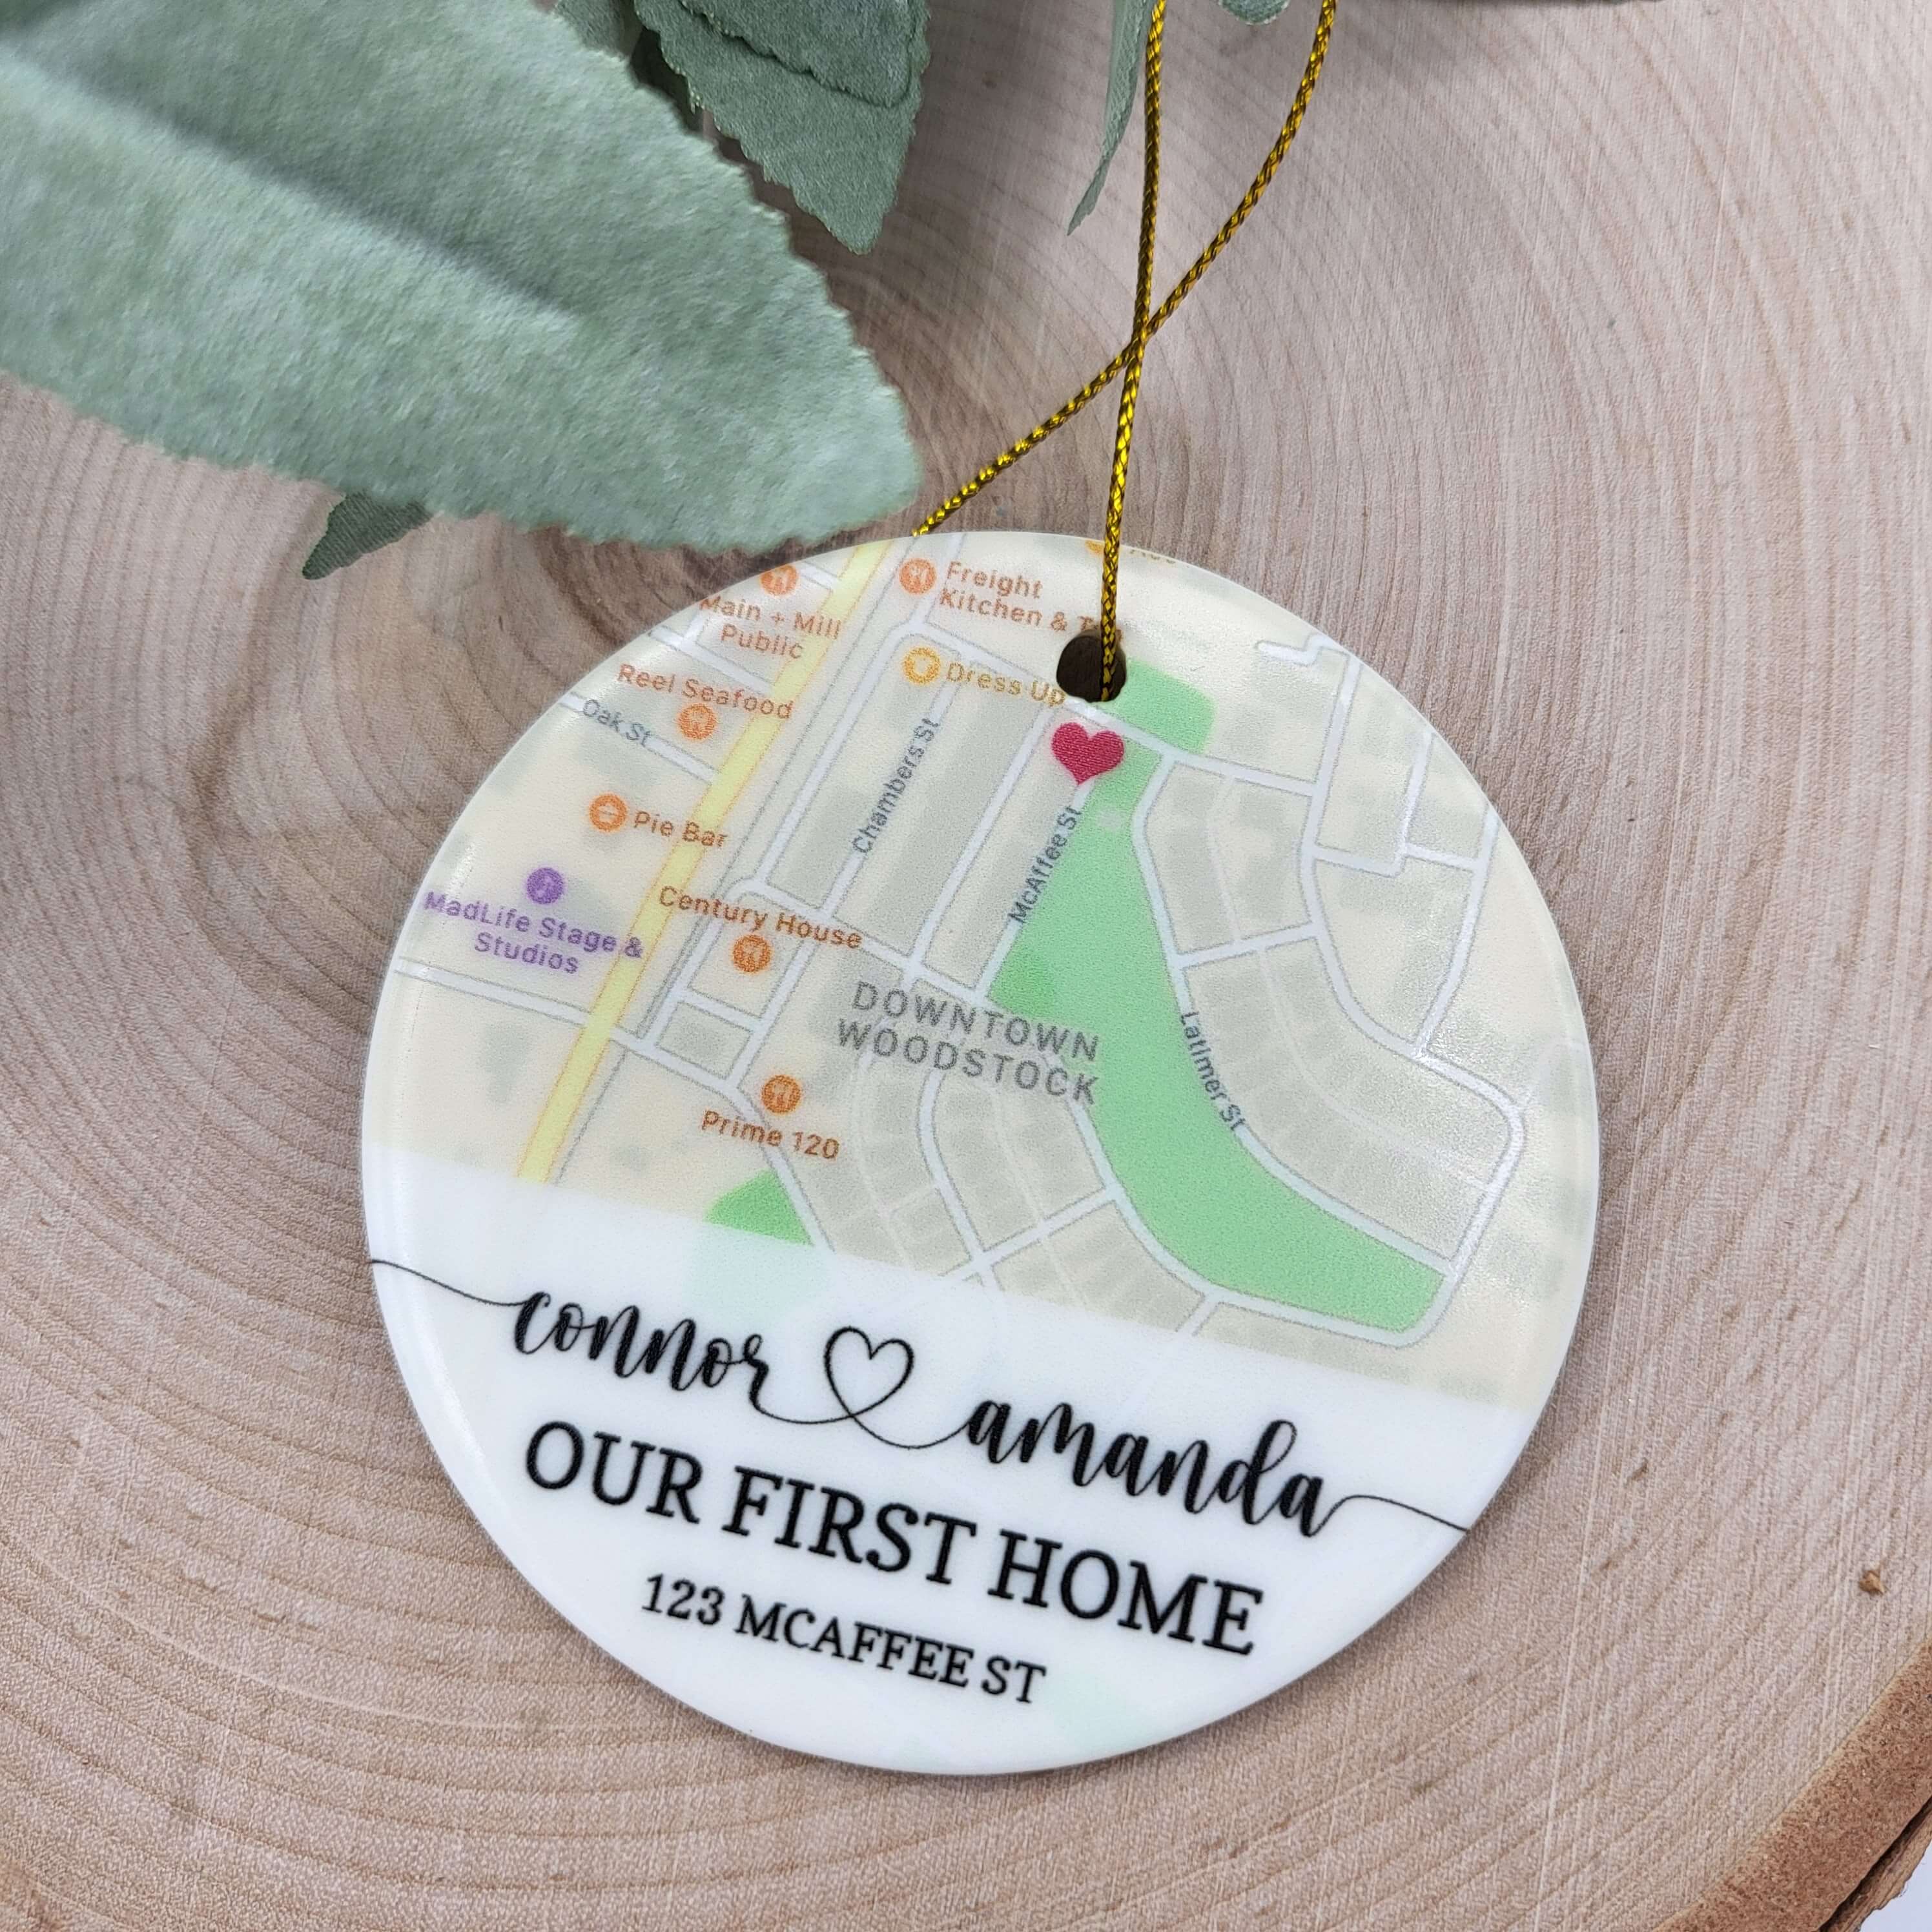 Ceramic round ornament personalized with a map image, "Our First Home", the names of the couple and an address